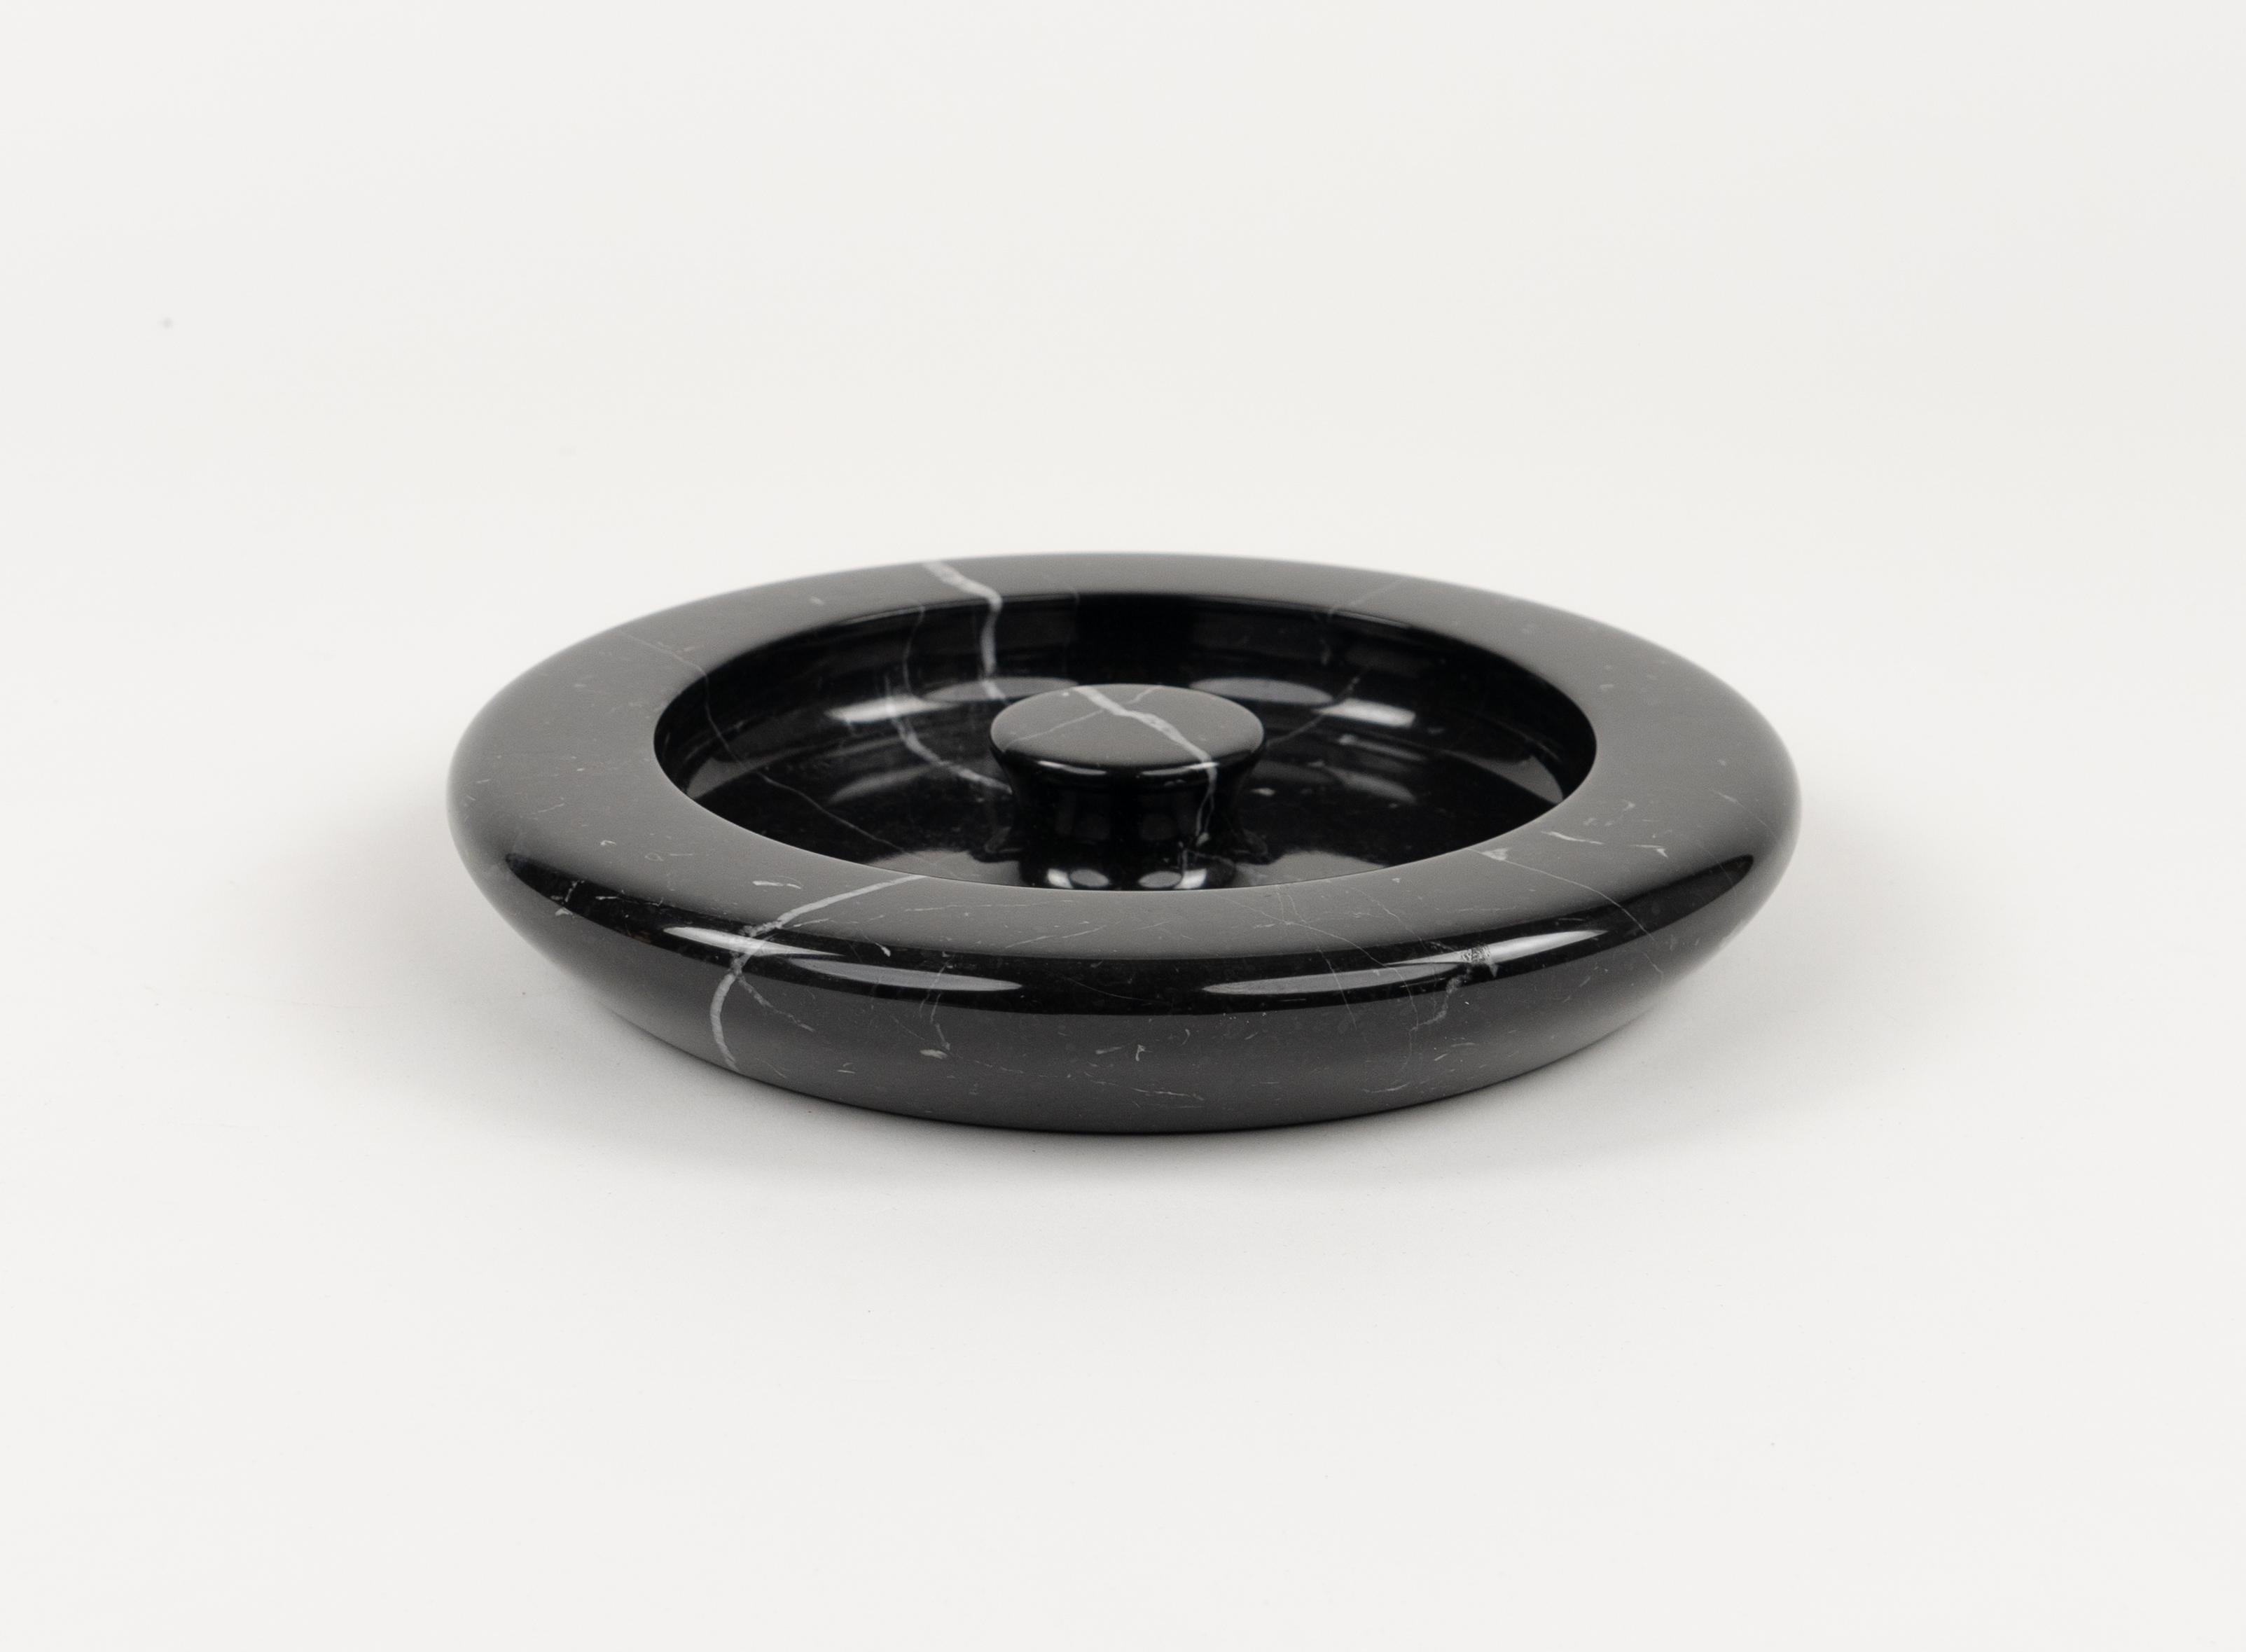 Black Marble Ashtray or Vide-Poche attributed to Angelo Mangiarotti, Italy 1970s For Sale 7